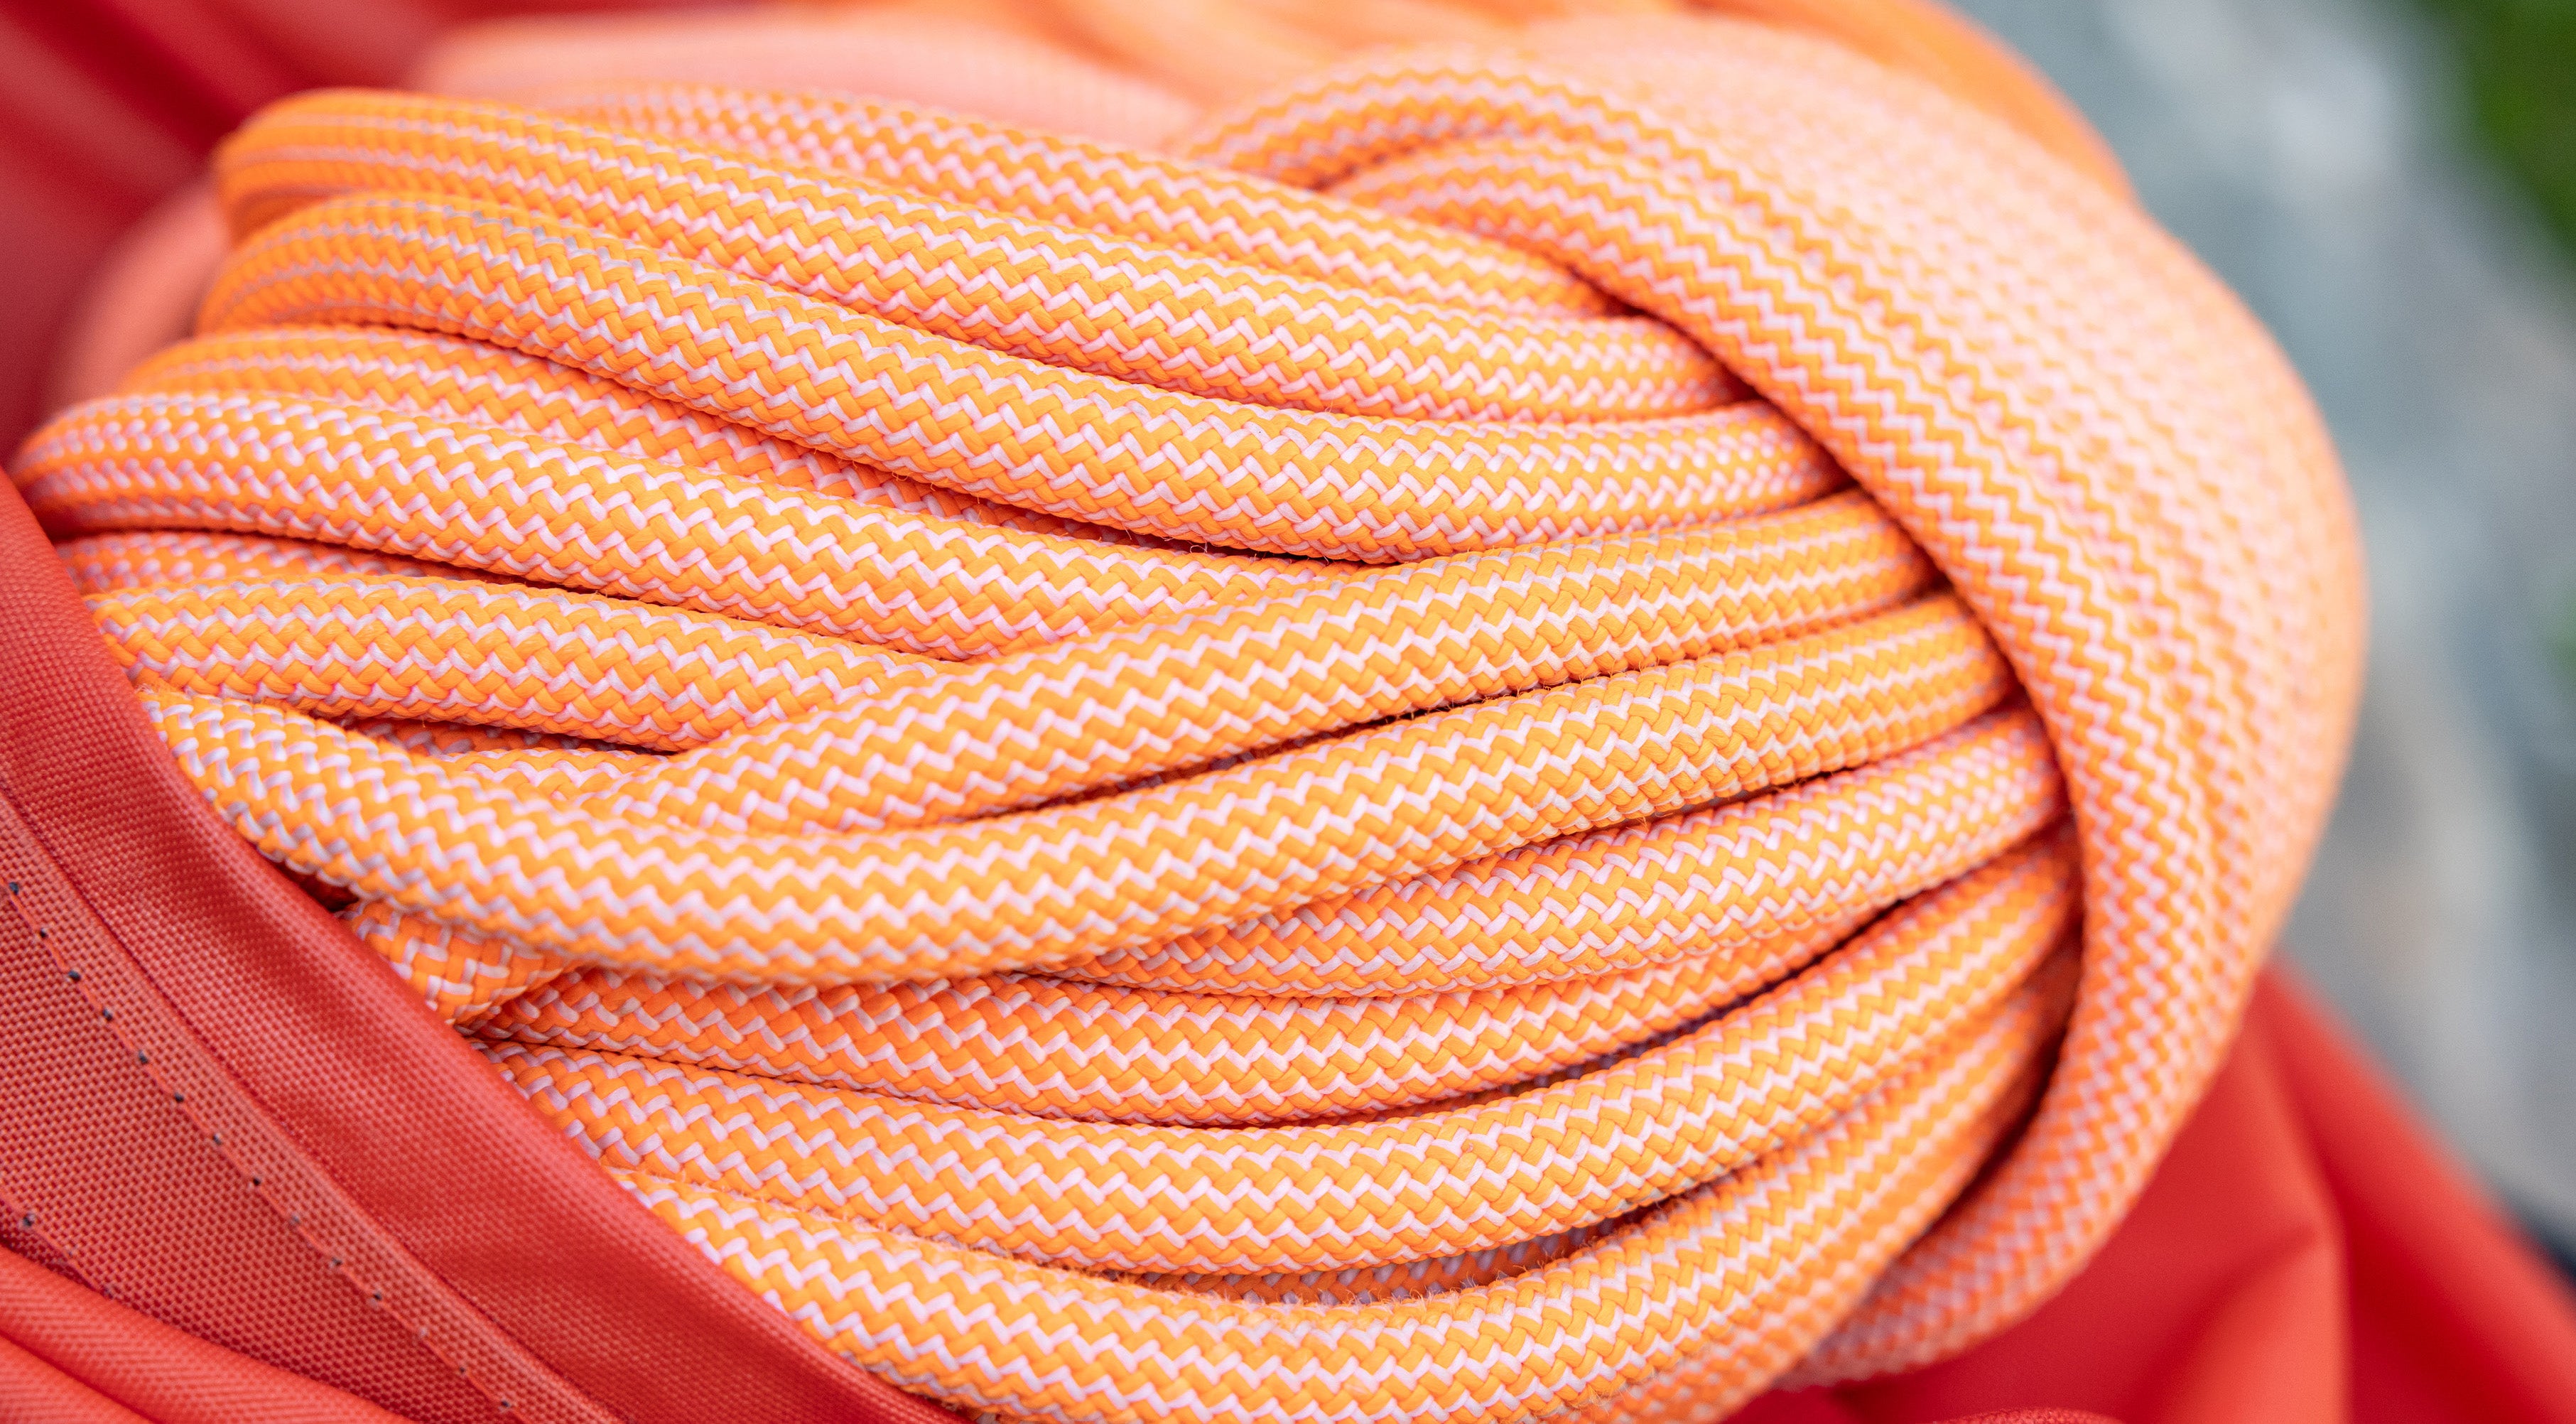 4mm/5mm/6mm Weave Rope Sunscreen High-strength Nylon Tied